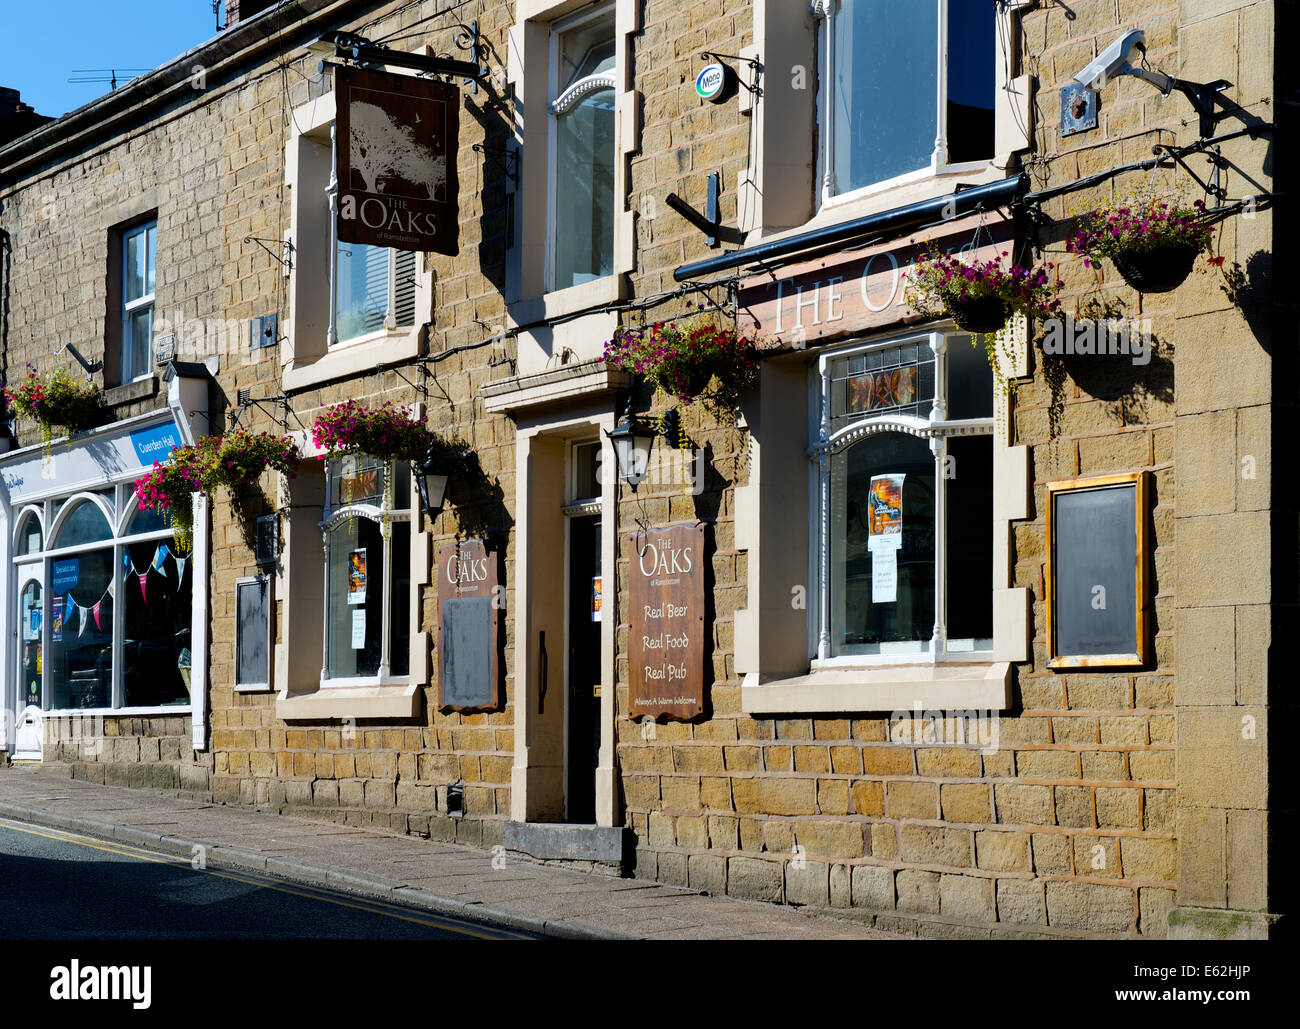 The Oaks pub in Ramsbottom, Greater Manchester, England UK Stock Photo